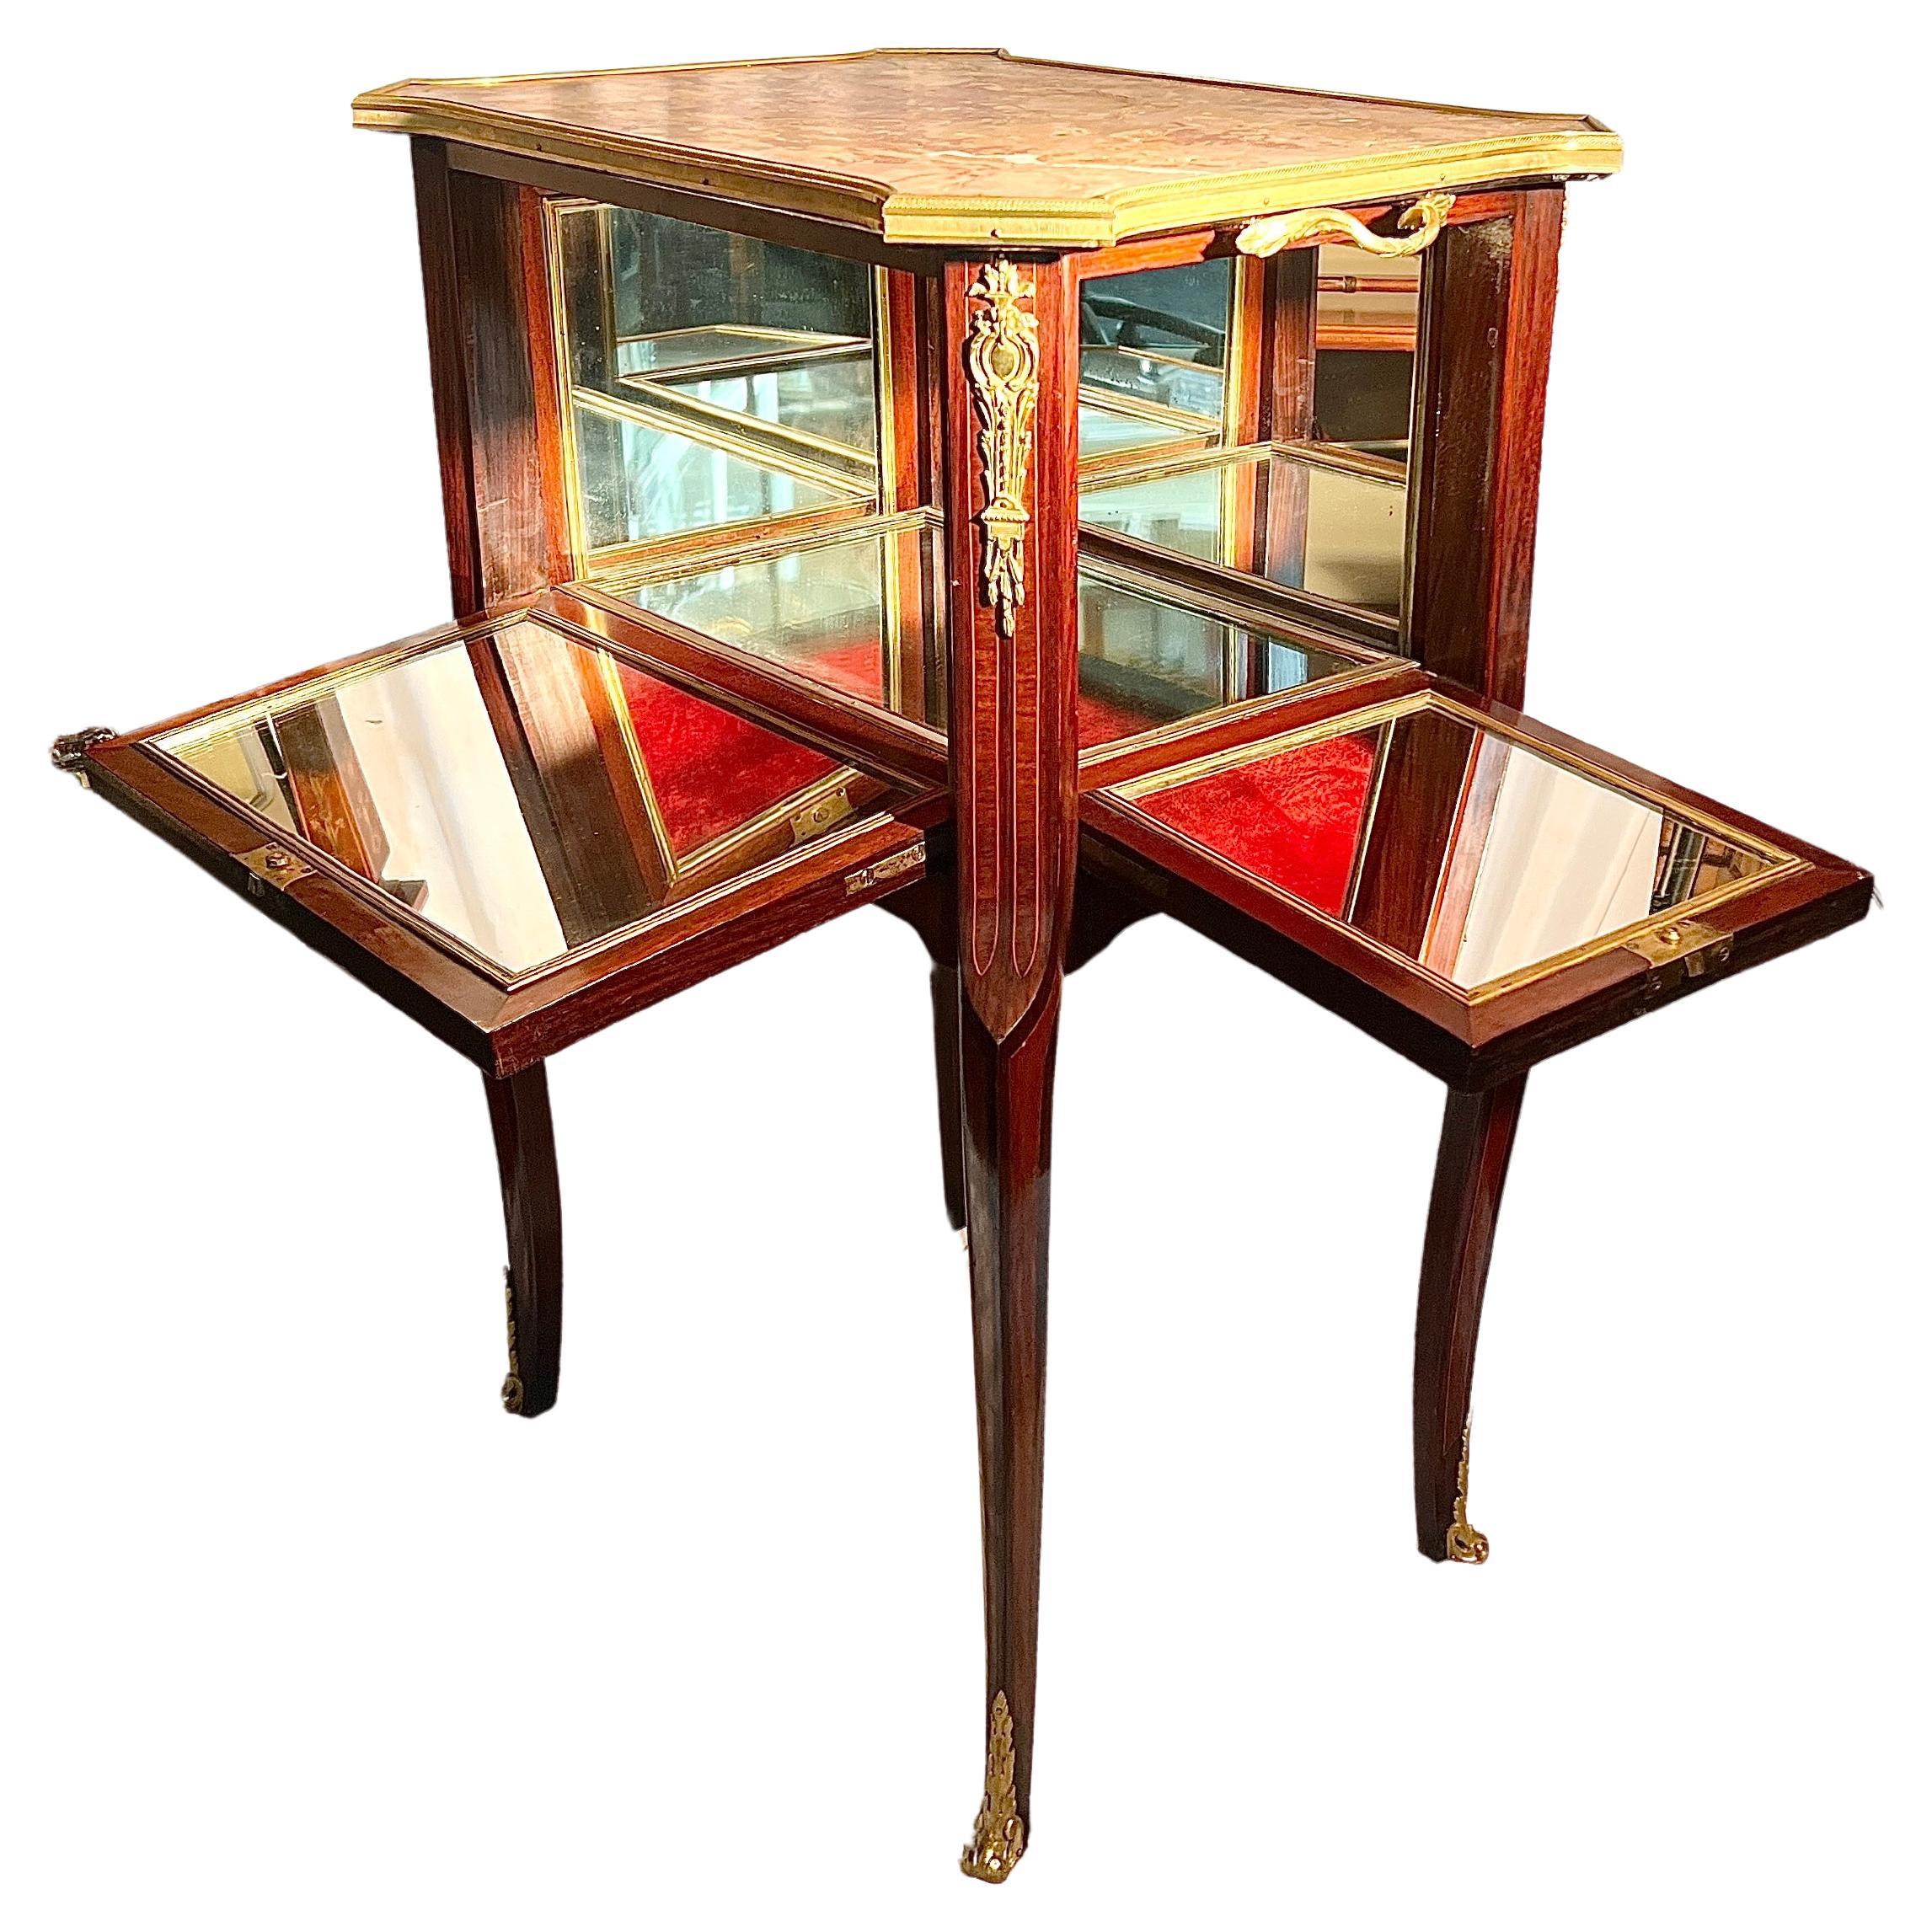 Antique French Napoleon III Mahogany Mirrored Cabinet with Marble Top Circa 1875 For Sale